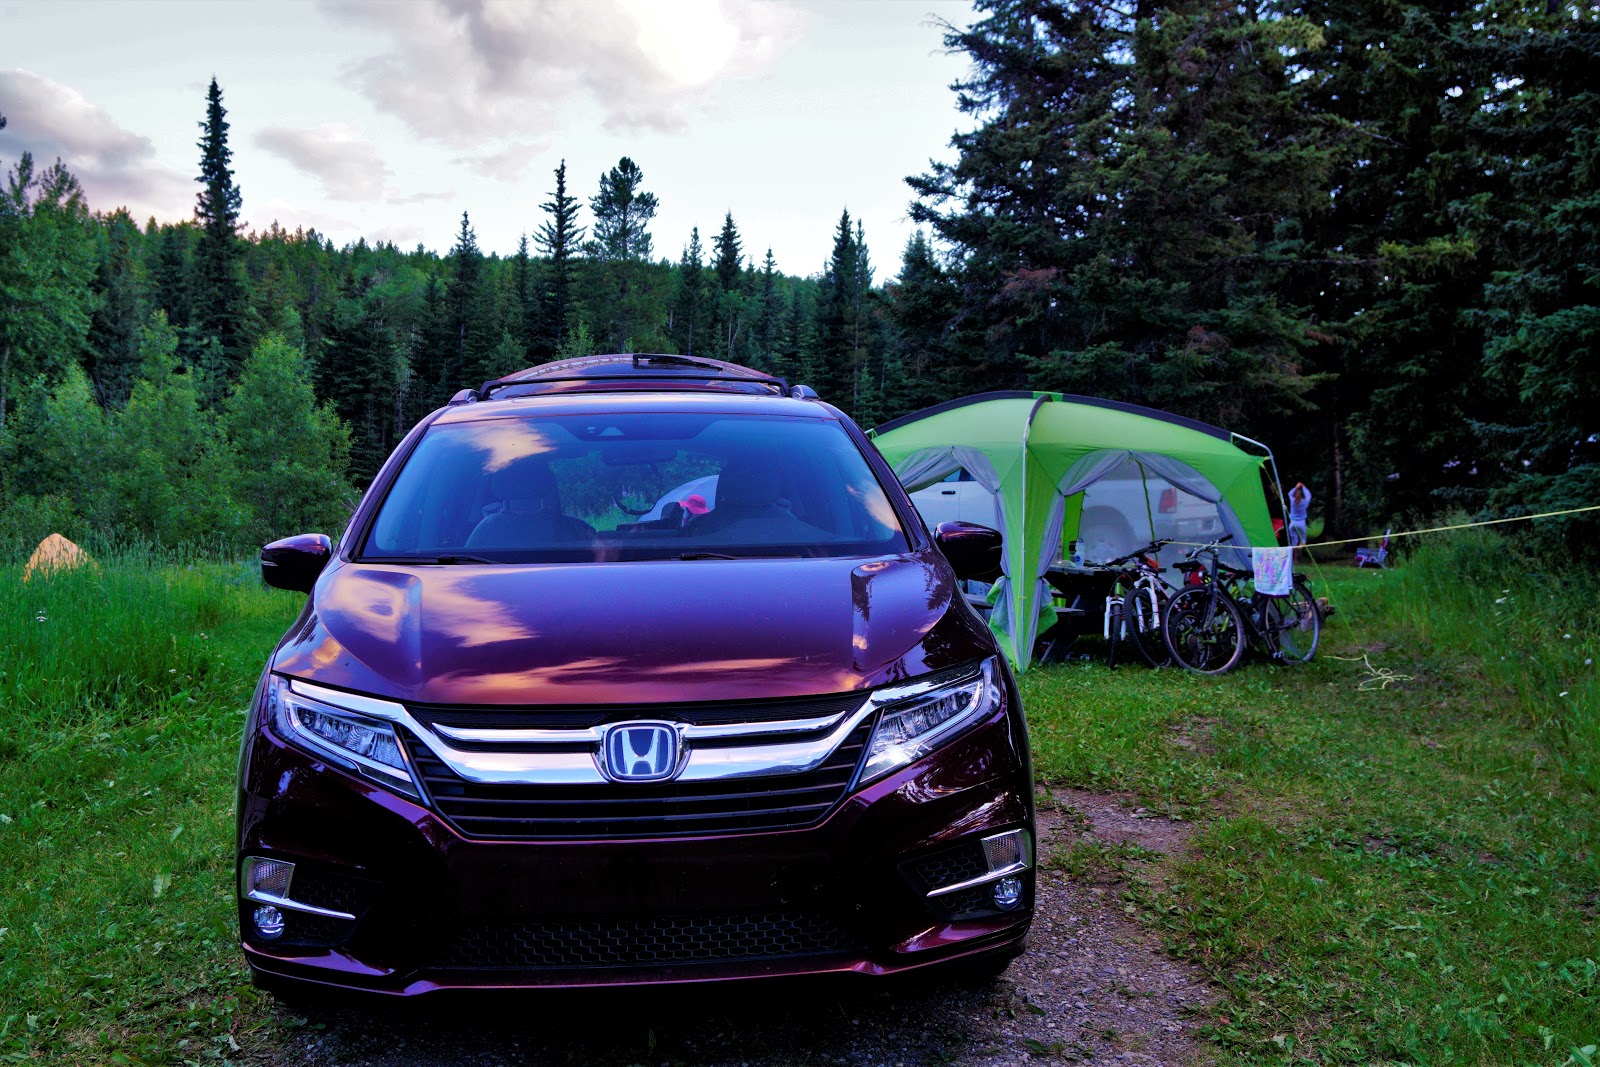 Our campsite at Indian Graves Campground